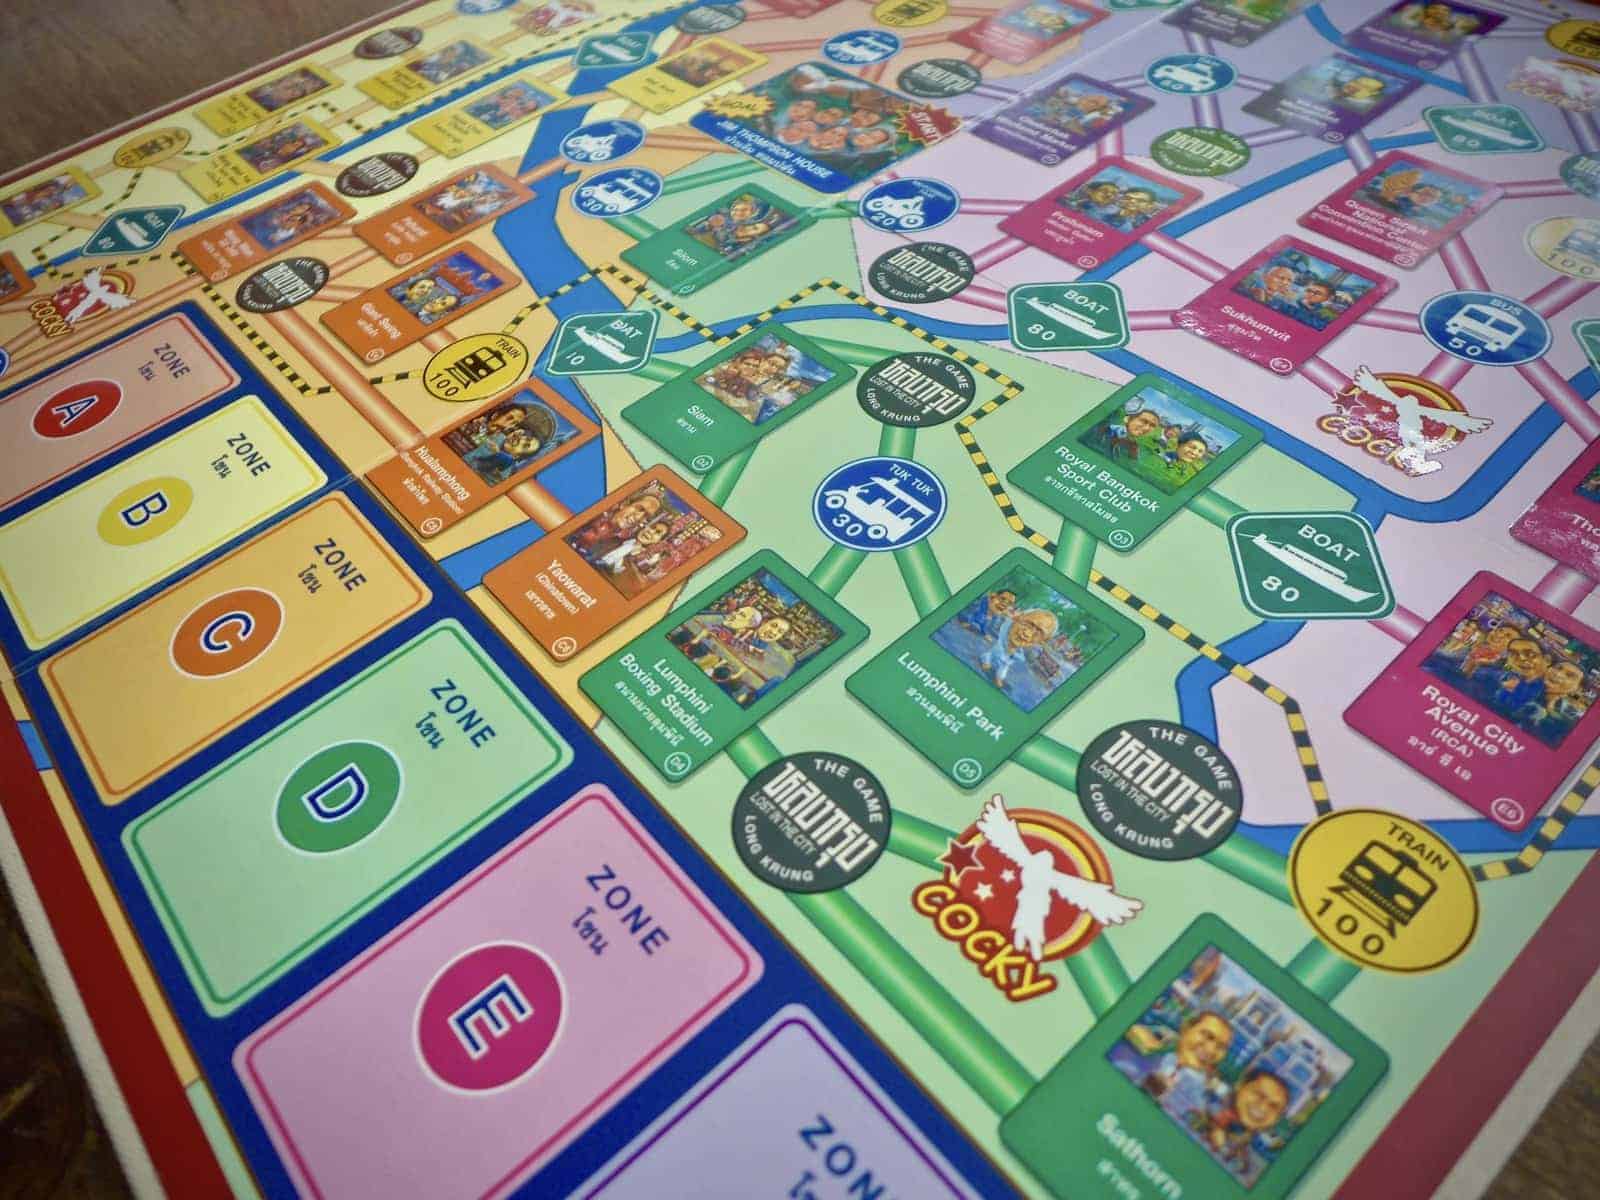 12 DIY Board Games So You're Never Bored